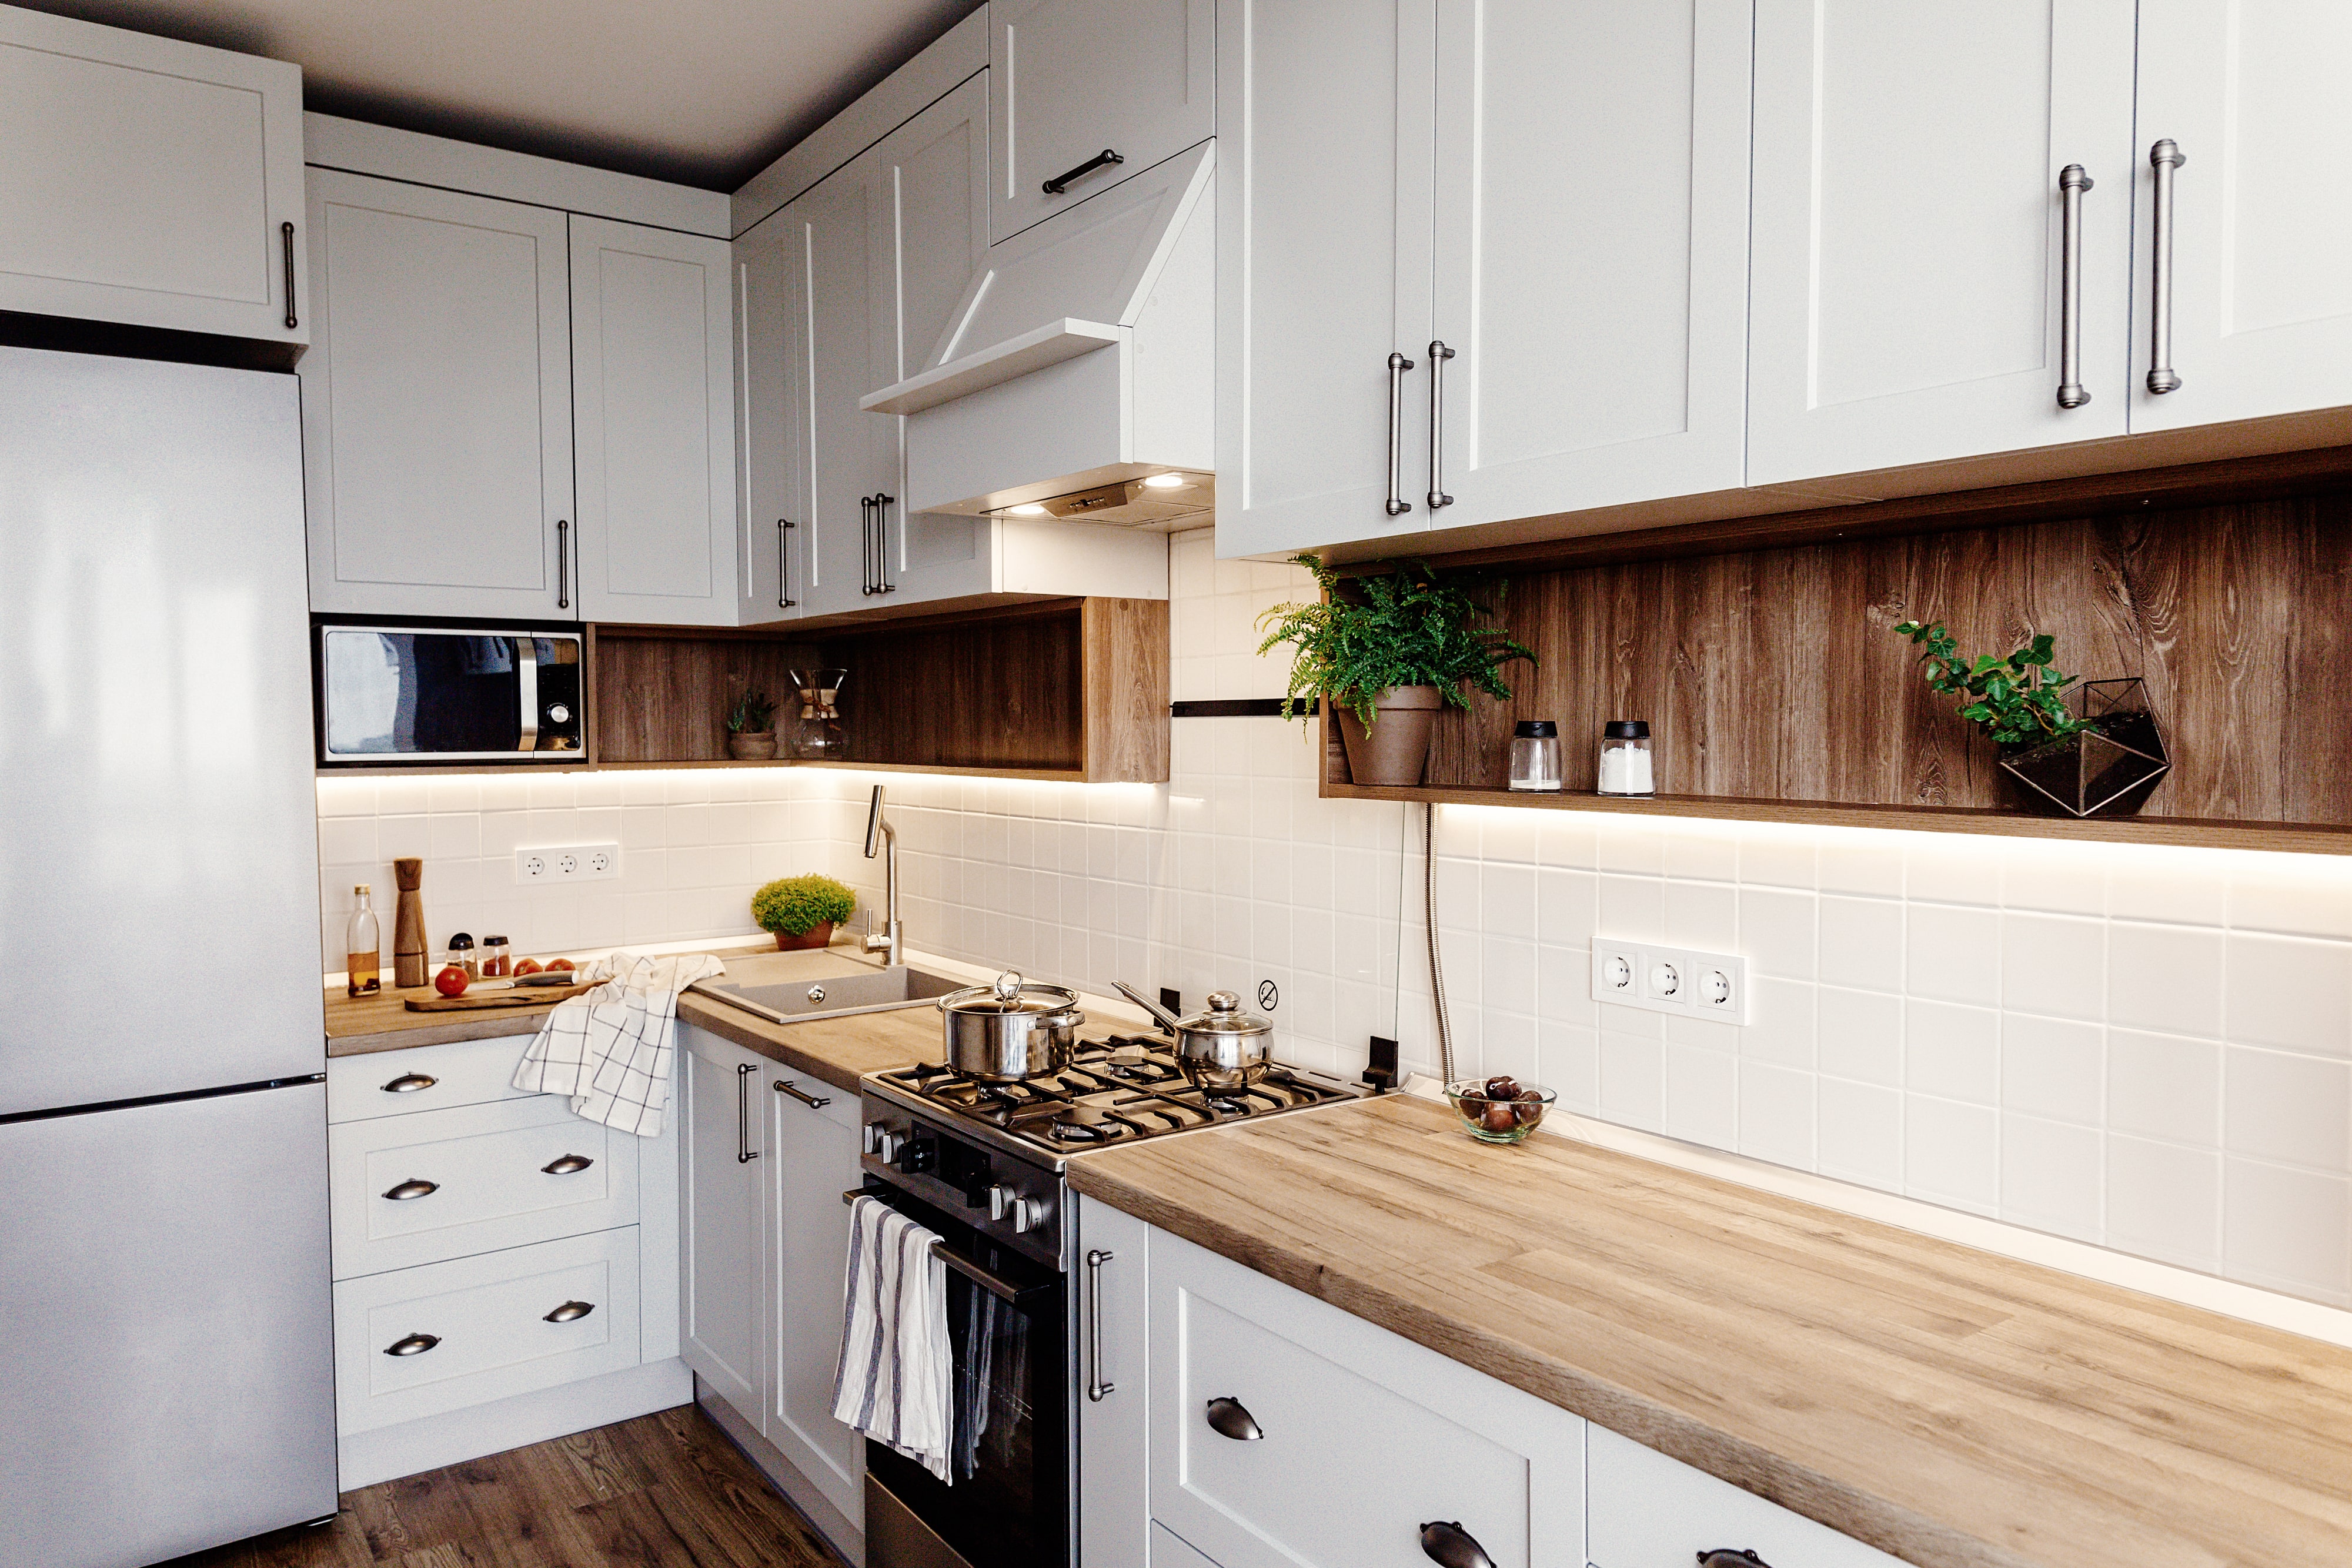 A kitchen with white cabinets, wooden shelving, wood countertops, and wood flooring